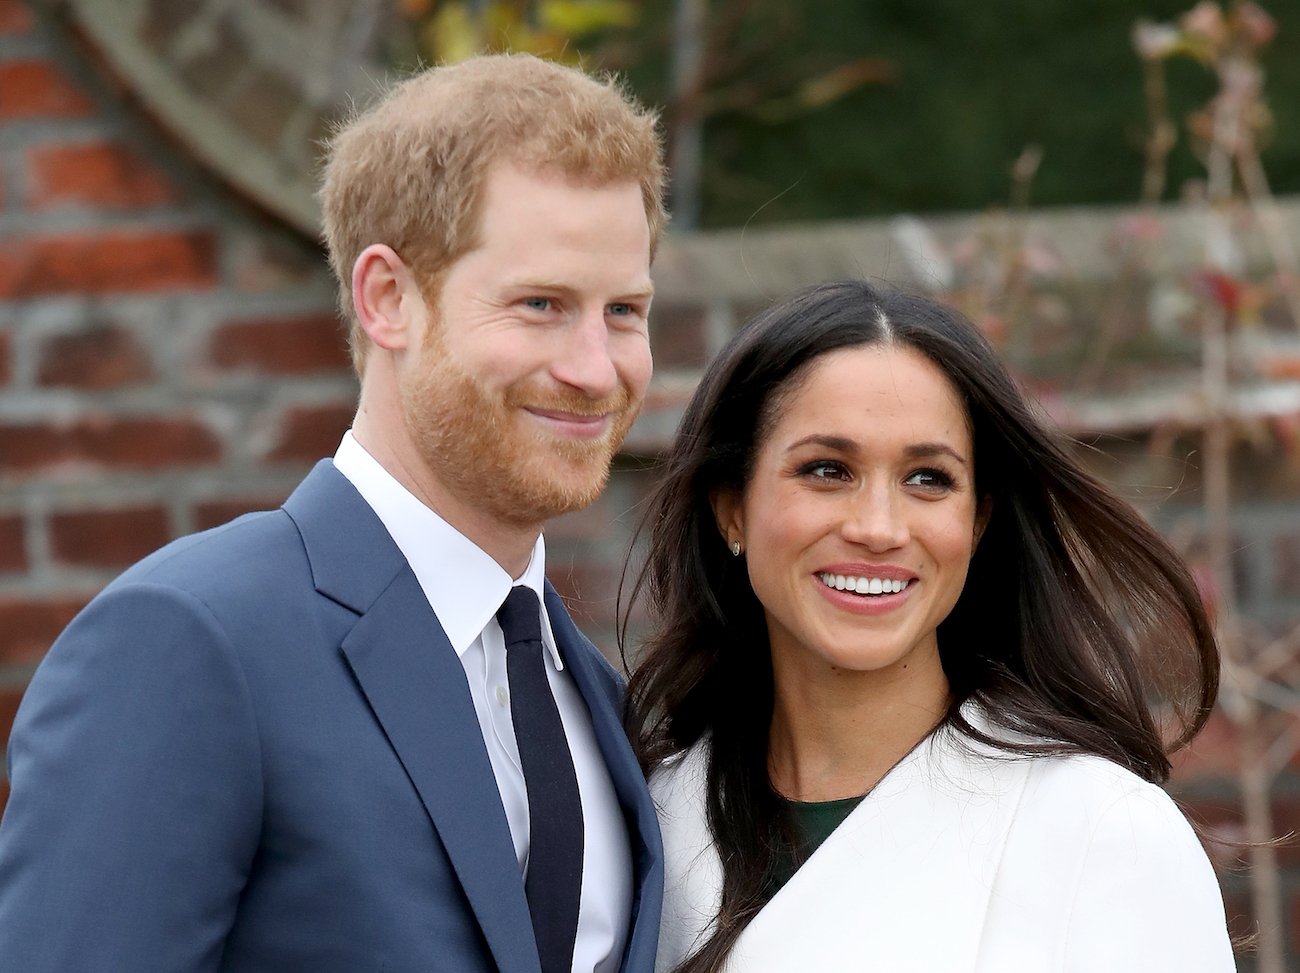 Prince Harry and Meghan Markle looking off-camera and smiling. Harry wears a suit and tie and Meghan is wearing a white overcoat